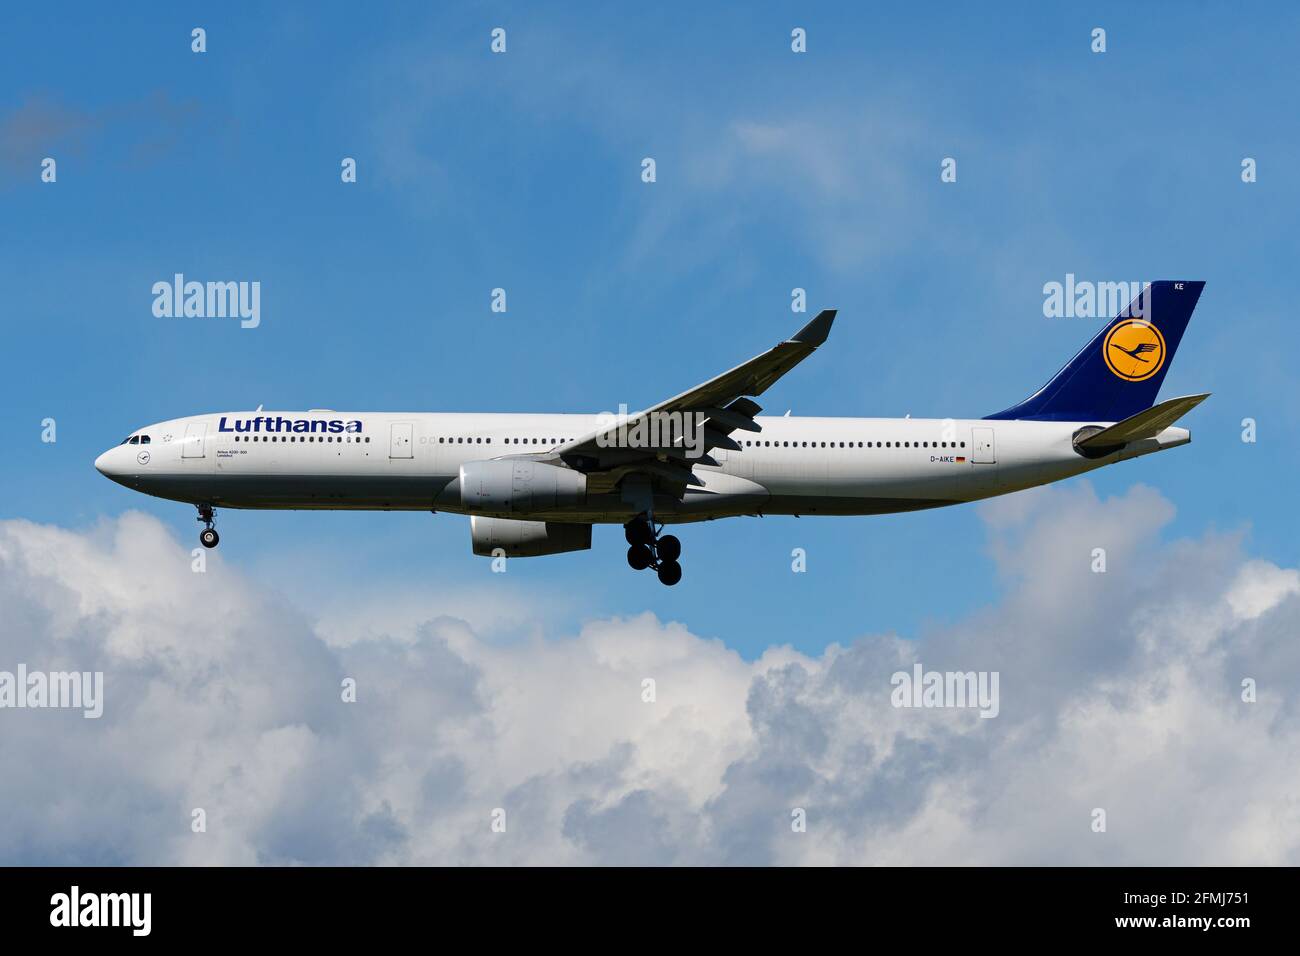 Richmond, British Columbia, Canada. 7th May, 2021. A Lufthansa Airbus A330-300 jet (D-AIKE) airborne on final approach for landing at Vancouver International Airport. Credit: Bayne Stanley/ZUMA Wire/Alamy Live News Stock Photo